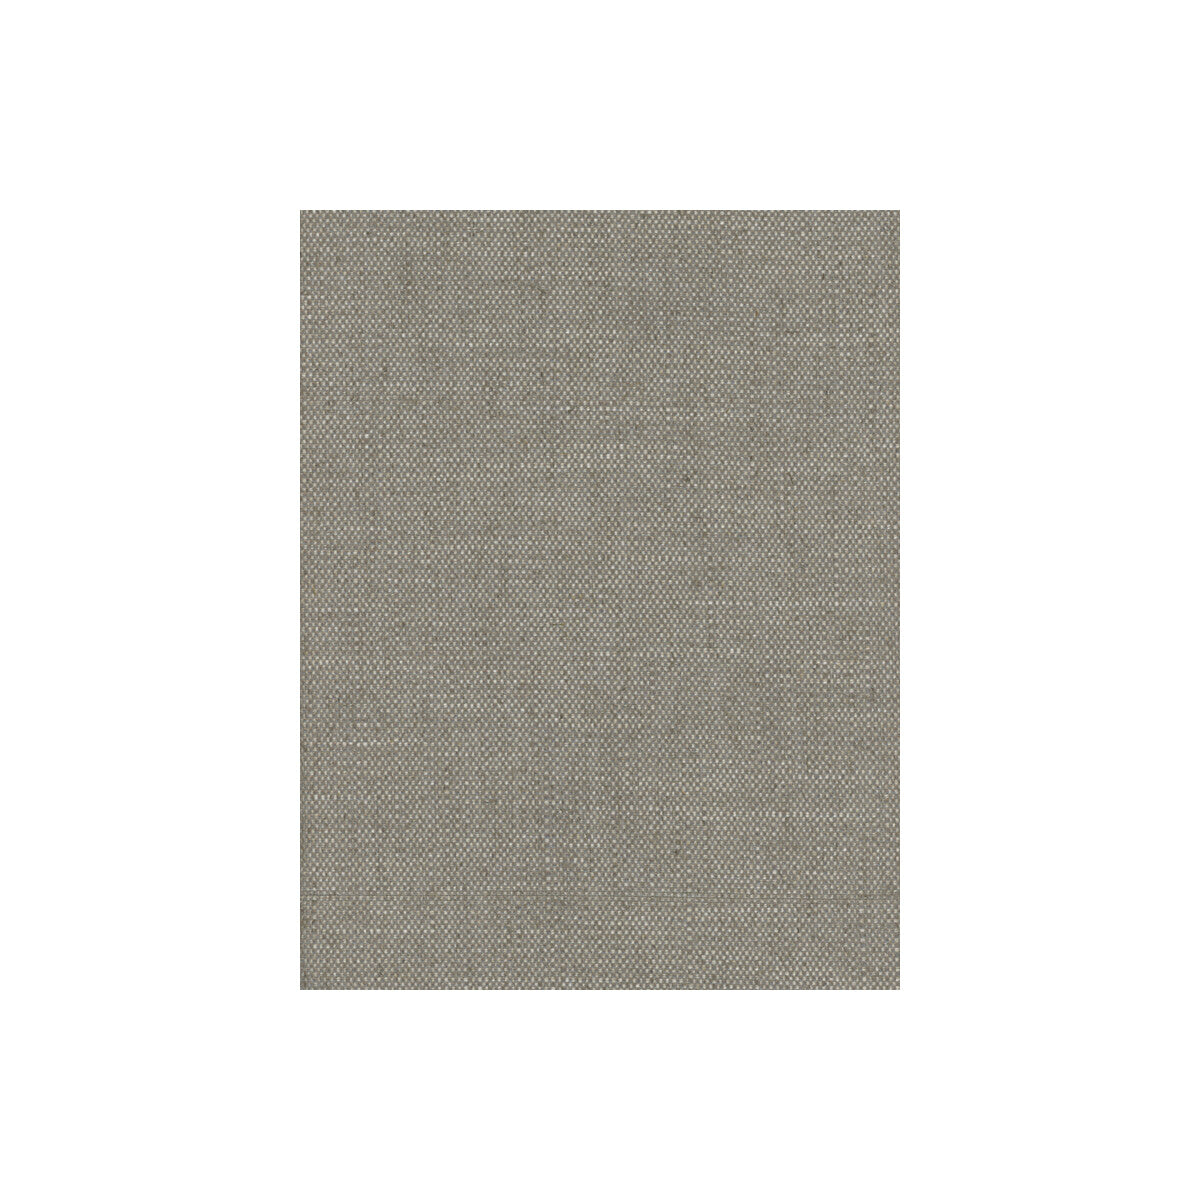 Ossington fabric in taupe color - pattern AM100179.106.0 - by Kravet Couture in the Andrew Martin Lost And Found collection